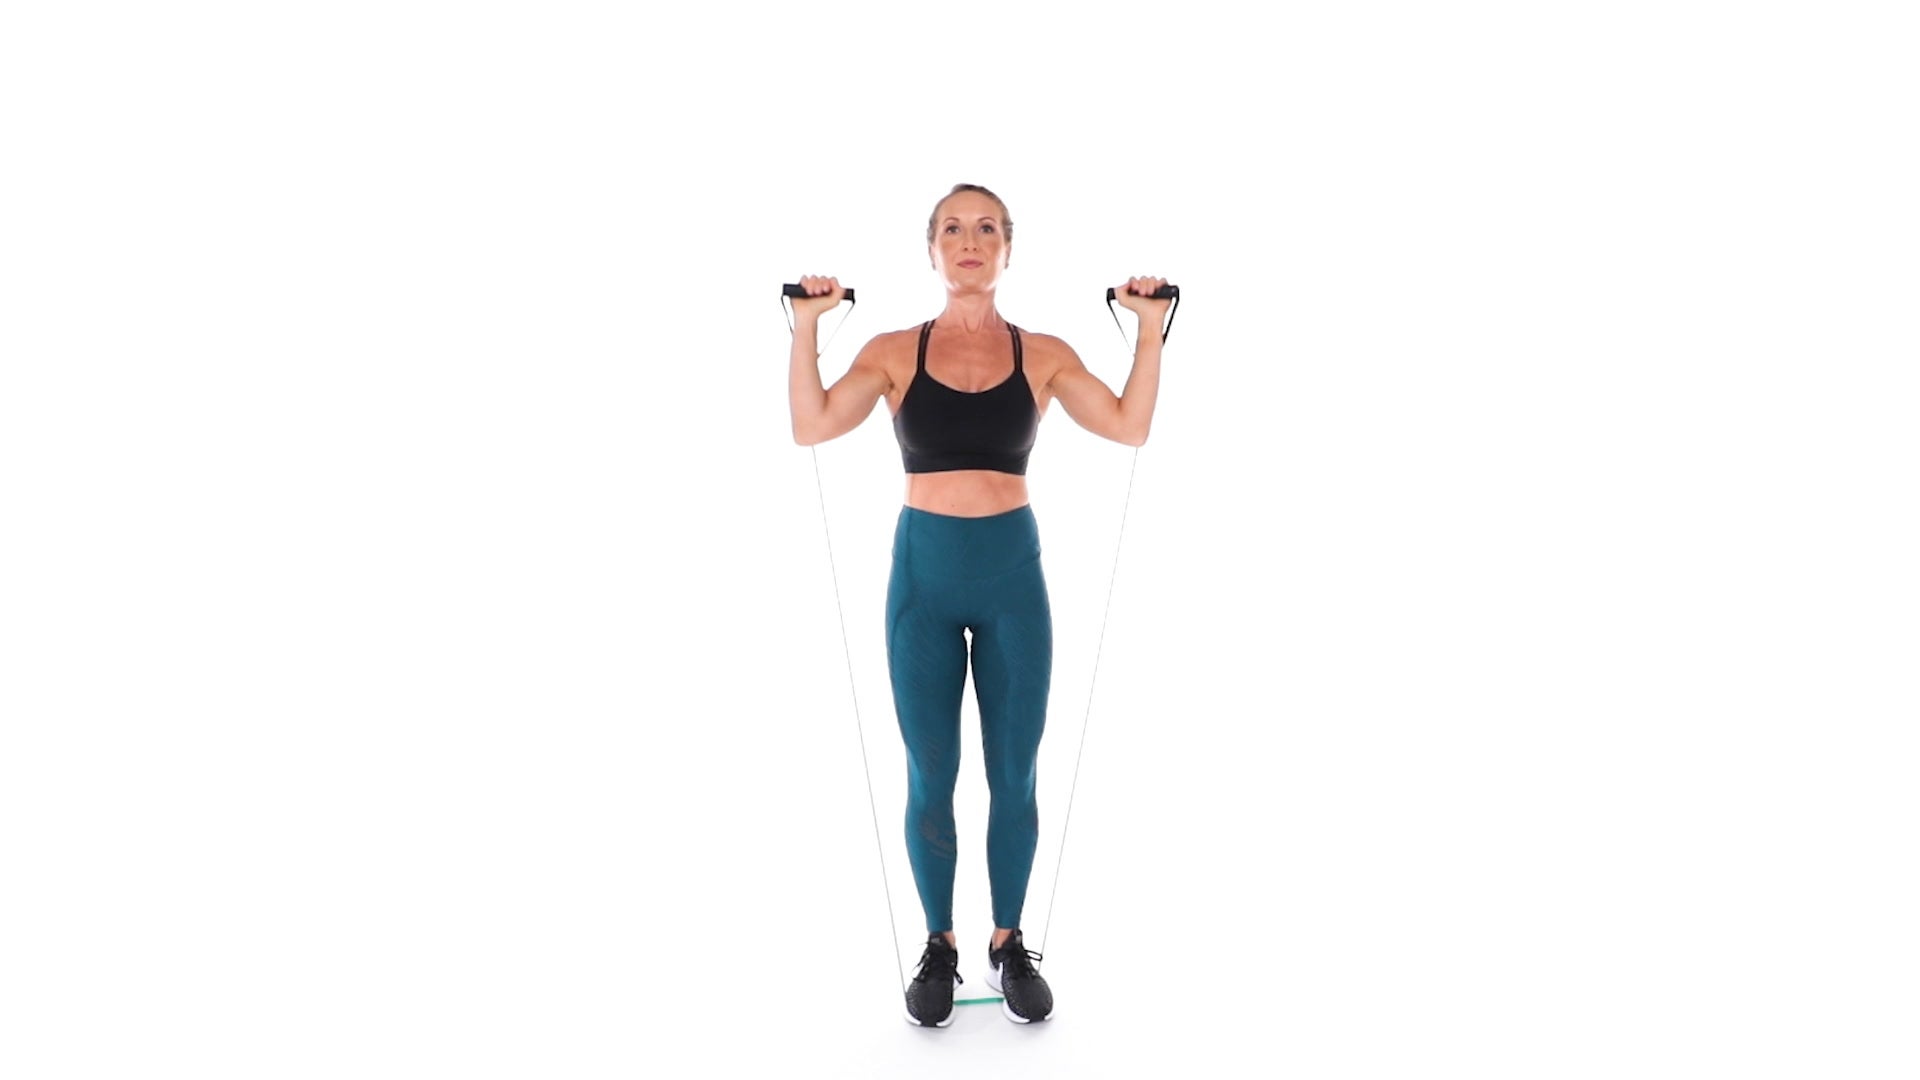 How To Do Resistance Band Overhead Shoulder Press